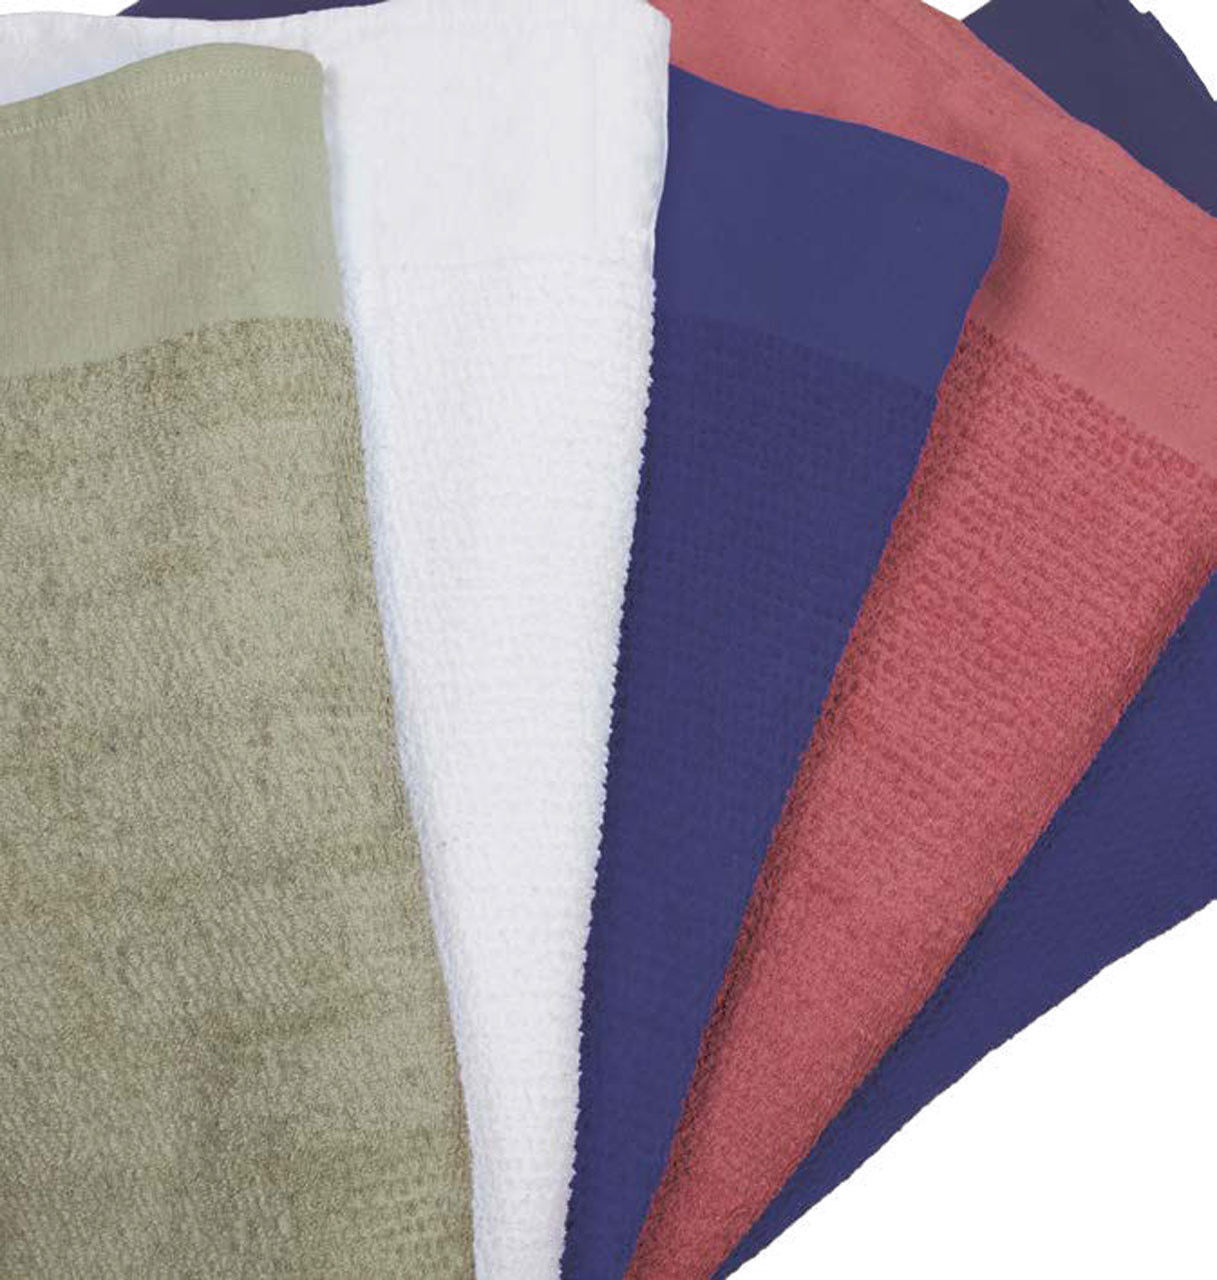 What is the reason for the tight weave of terry cloth blankets?